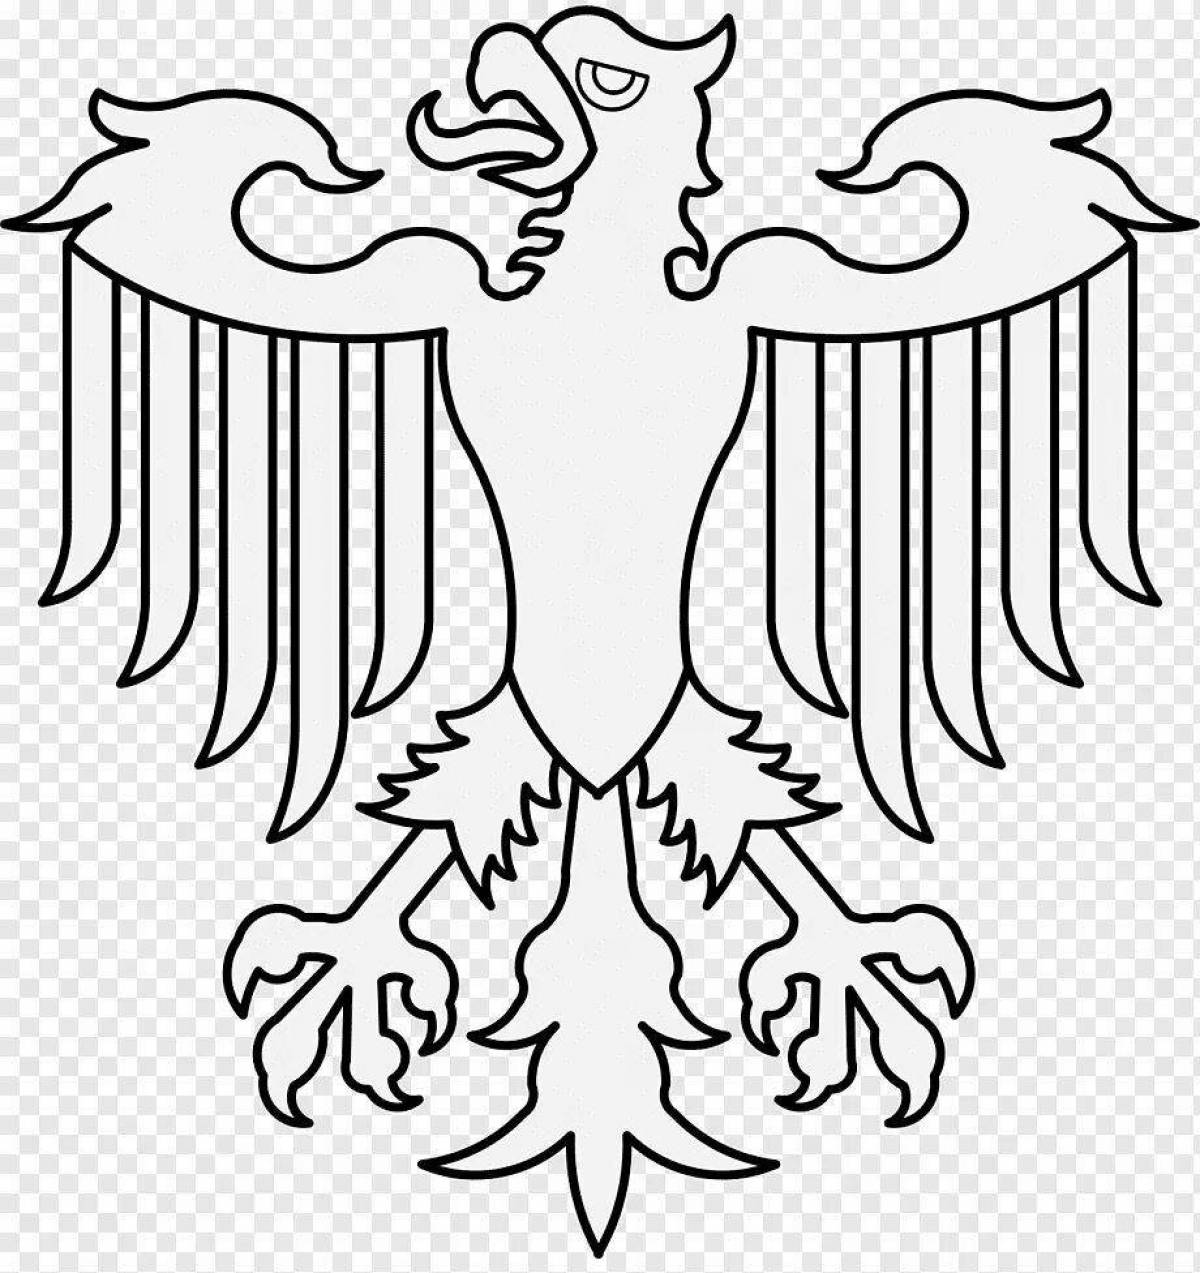 Coloring page elegant coat of arms of germany